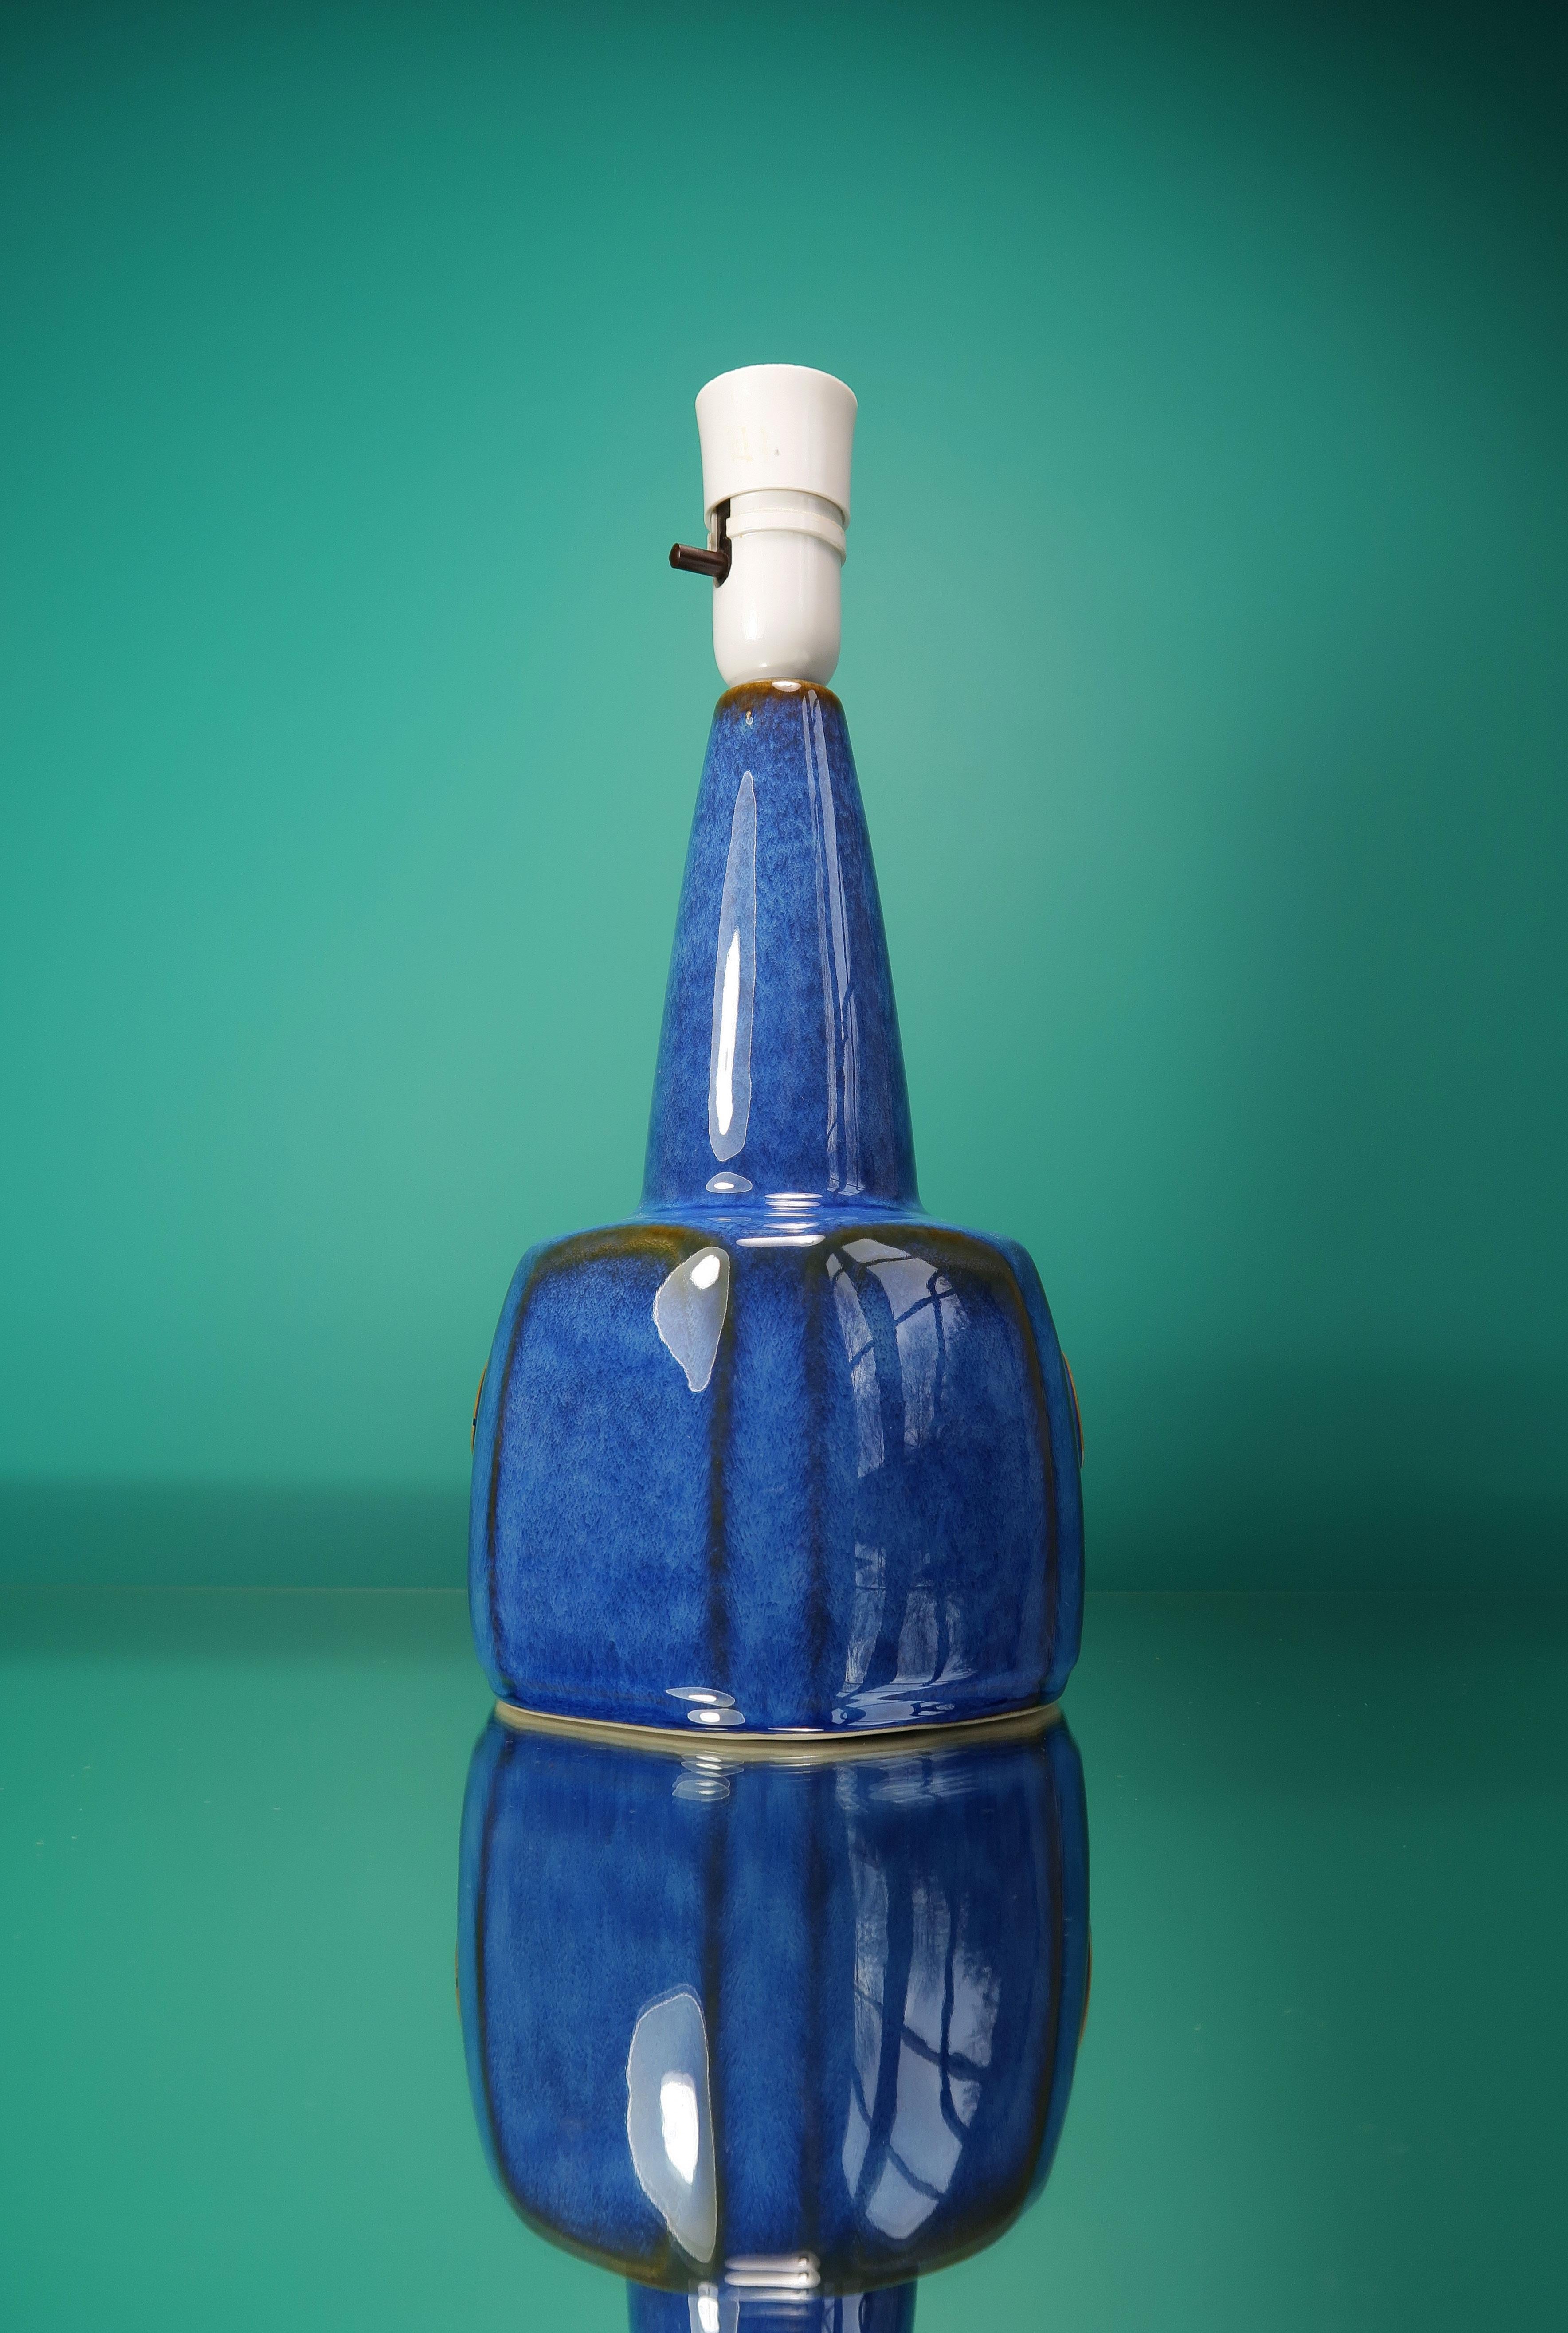 Classic Danish Mid-Century Modern table lamp by designer Einar Johansen. Manufactured by Søholm Stentøj on the island of Bornholm in the 1960s. Smooth and shiny cobalt and azure blue runny glaze over caramel glaze. Graphic circular symbol on belly.